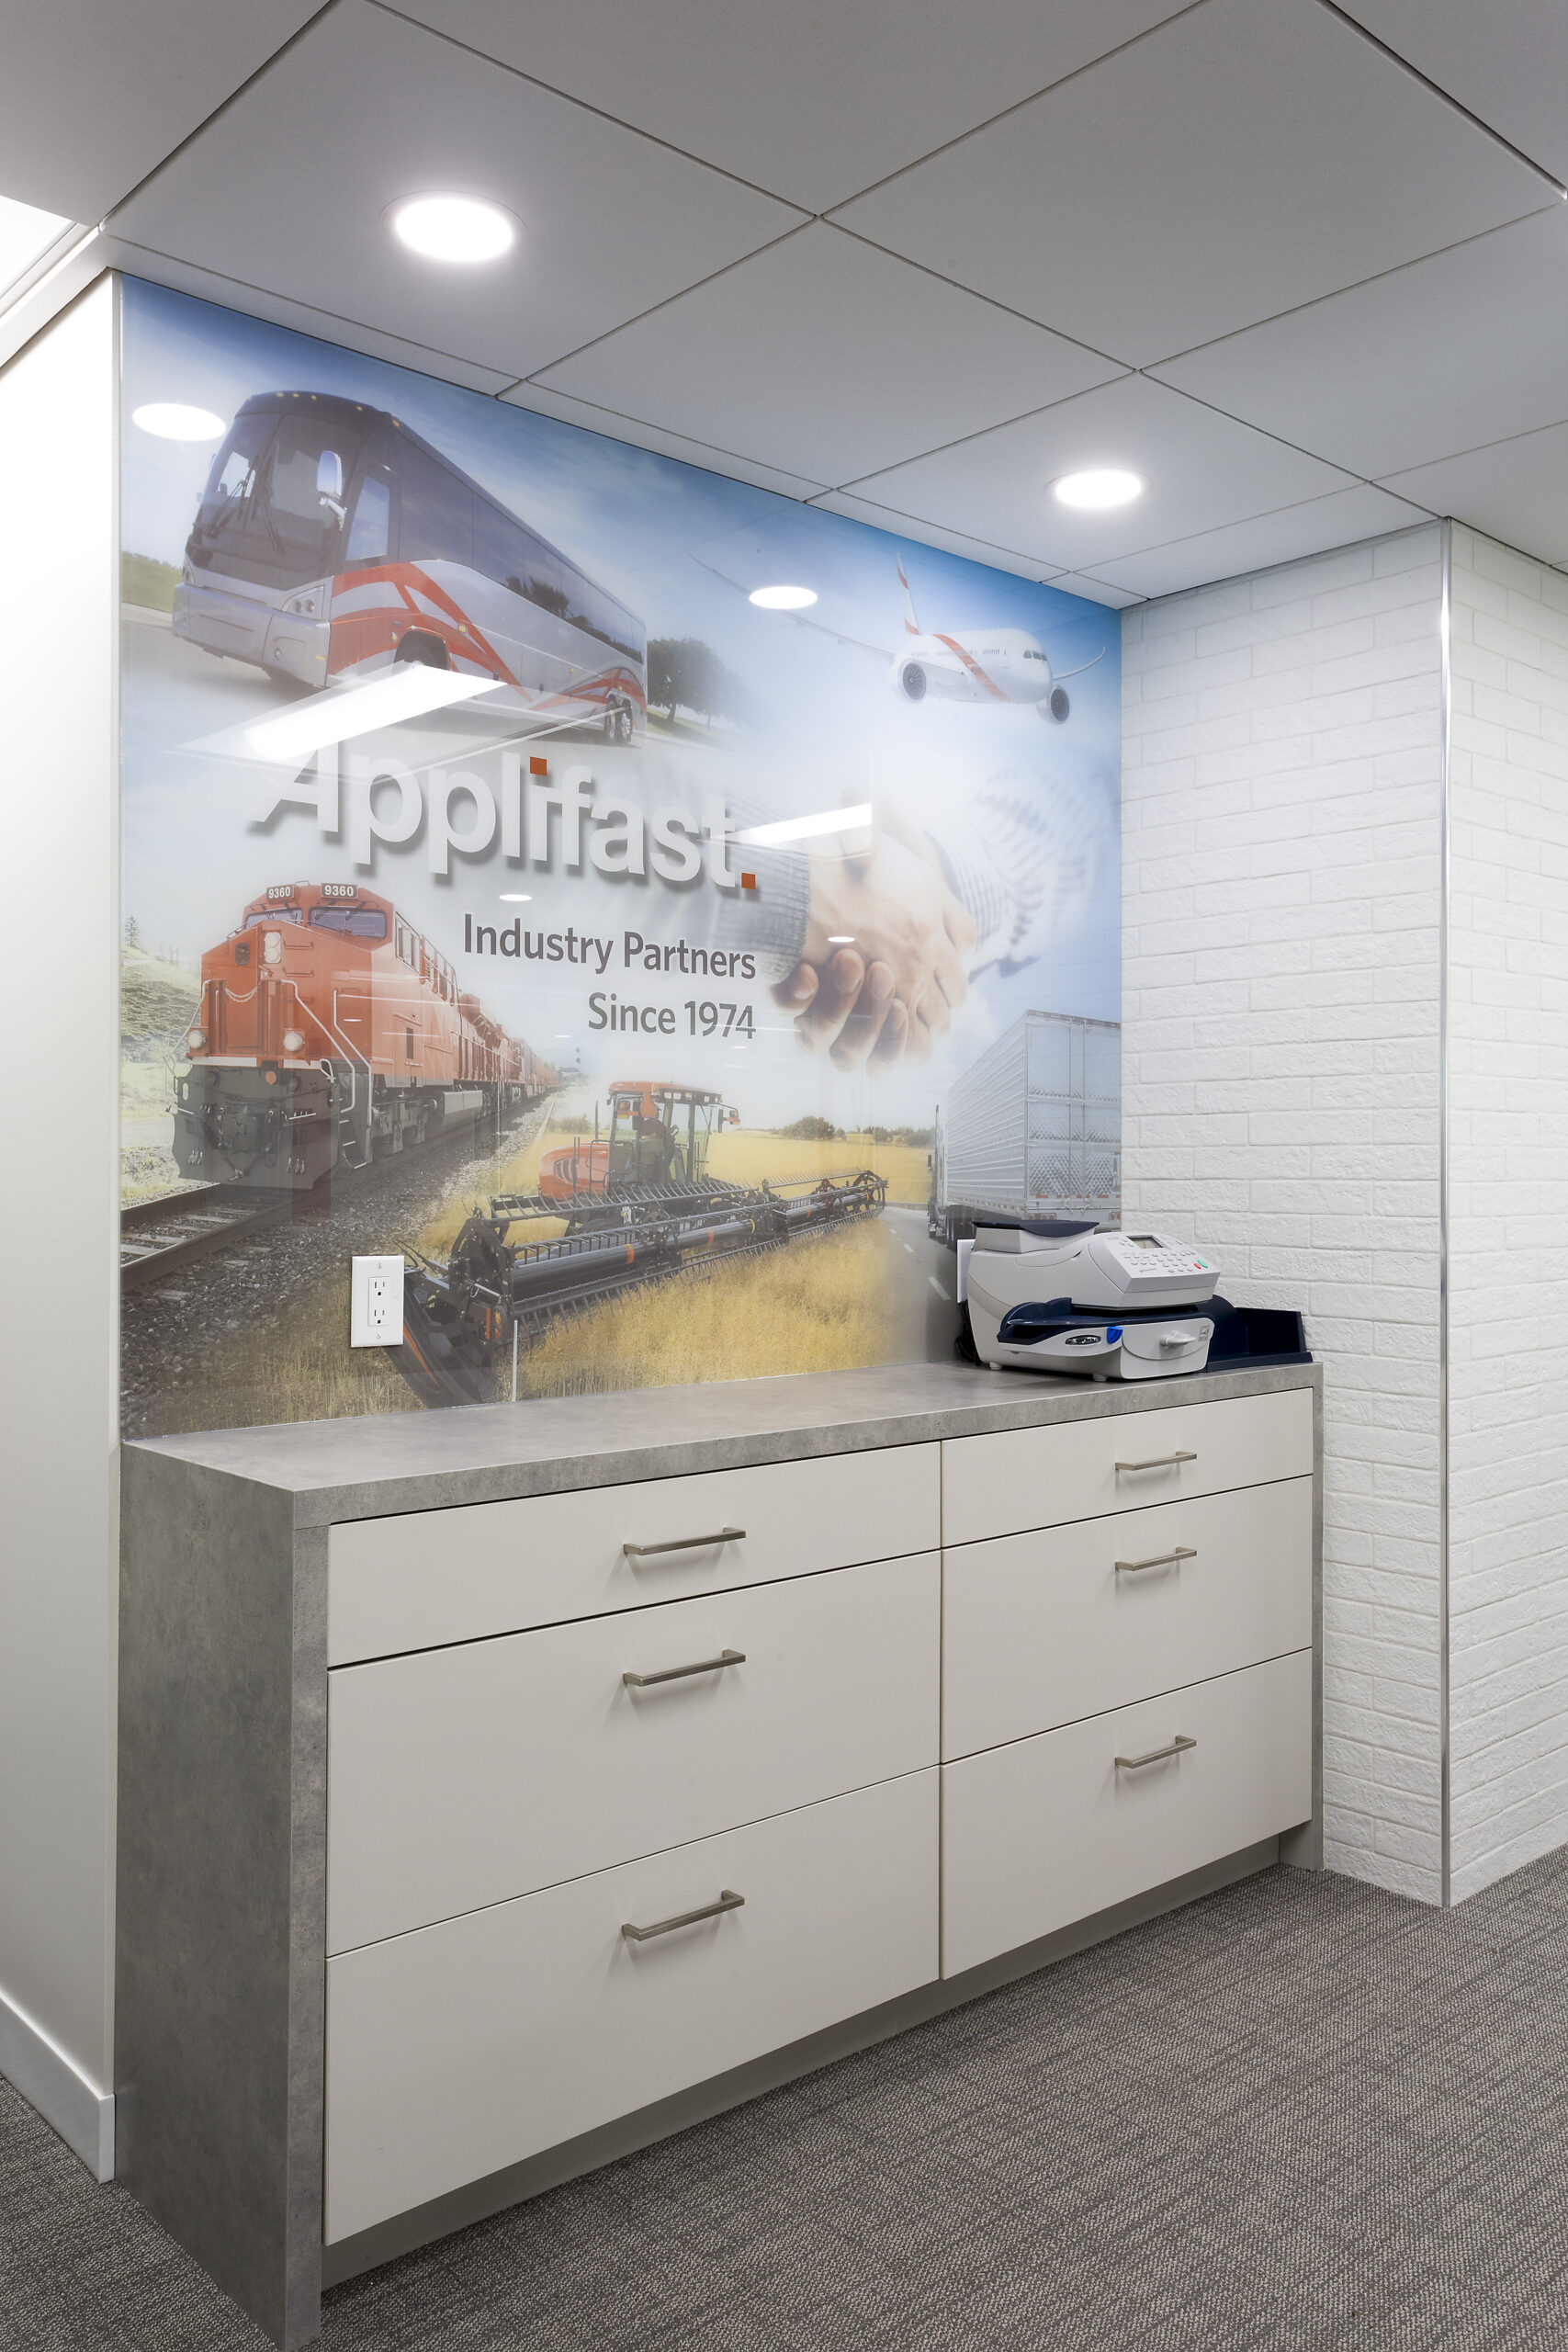 Applifast construction